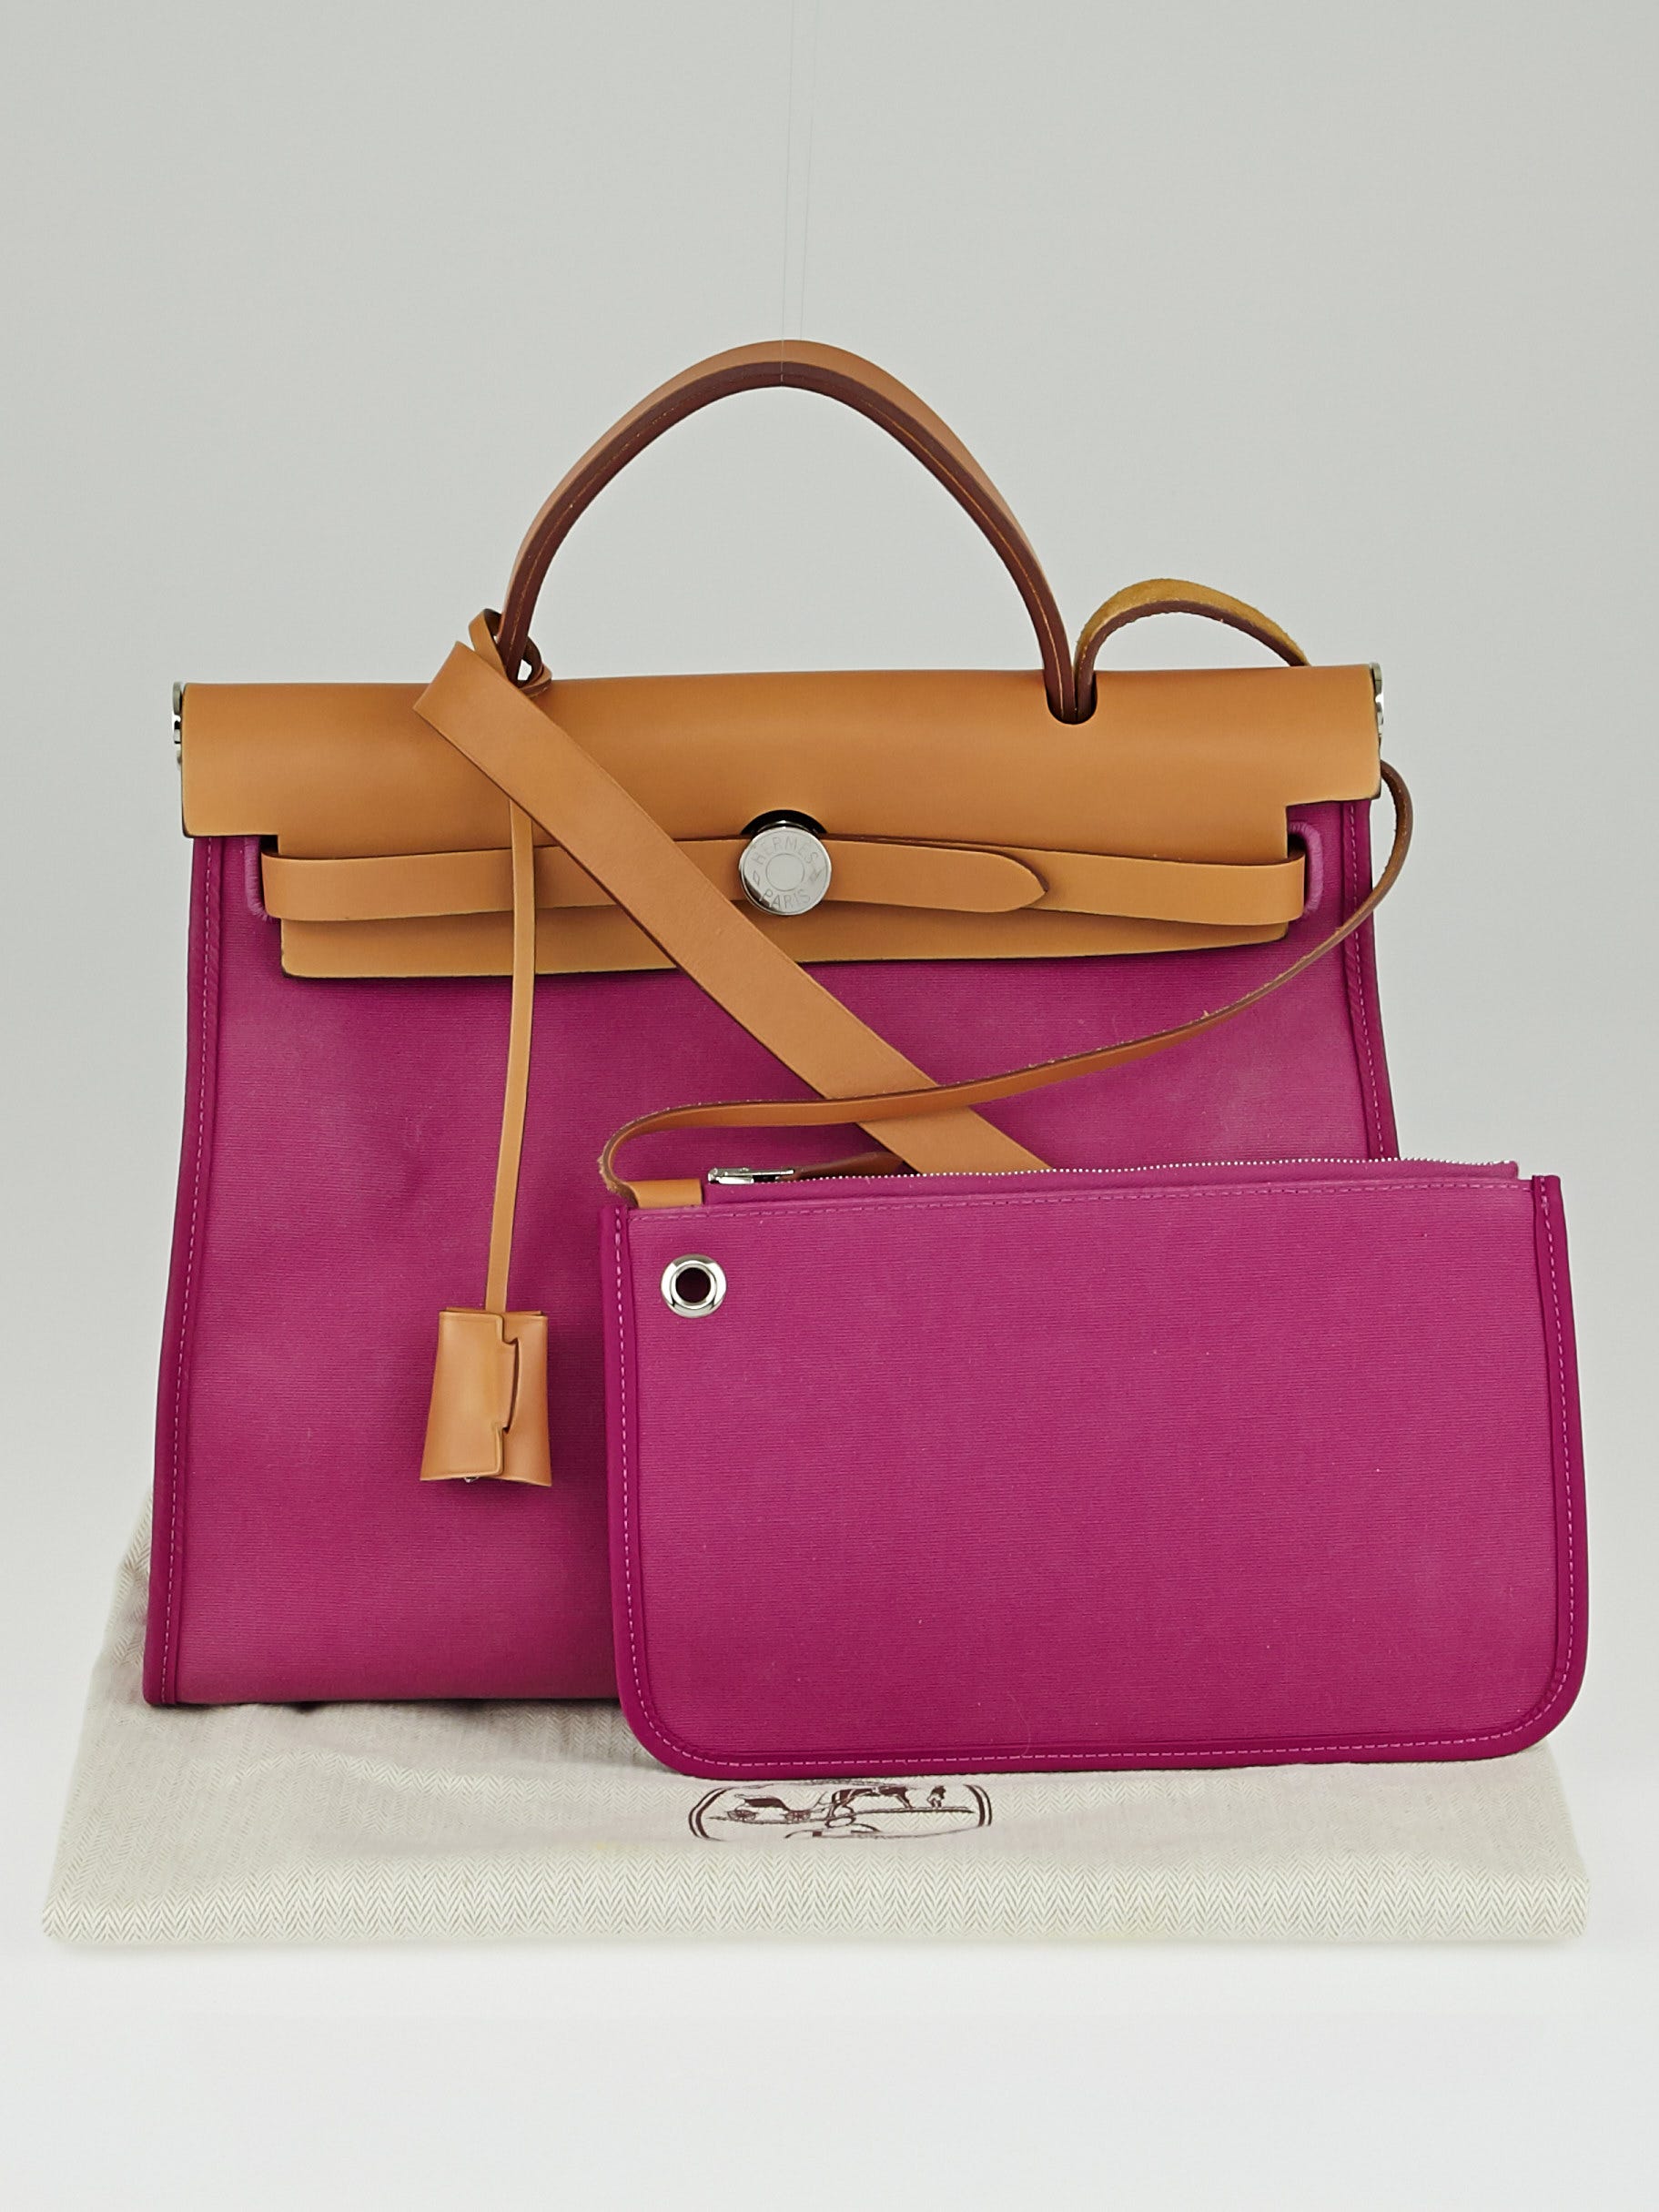 Hermes Pink Canvas and Natural Calfskin Leather Herbag Zip PM Bag